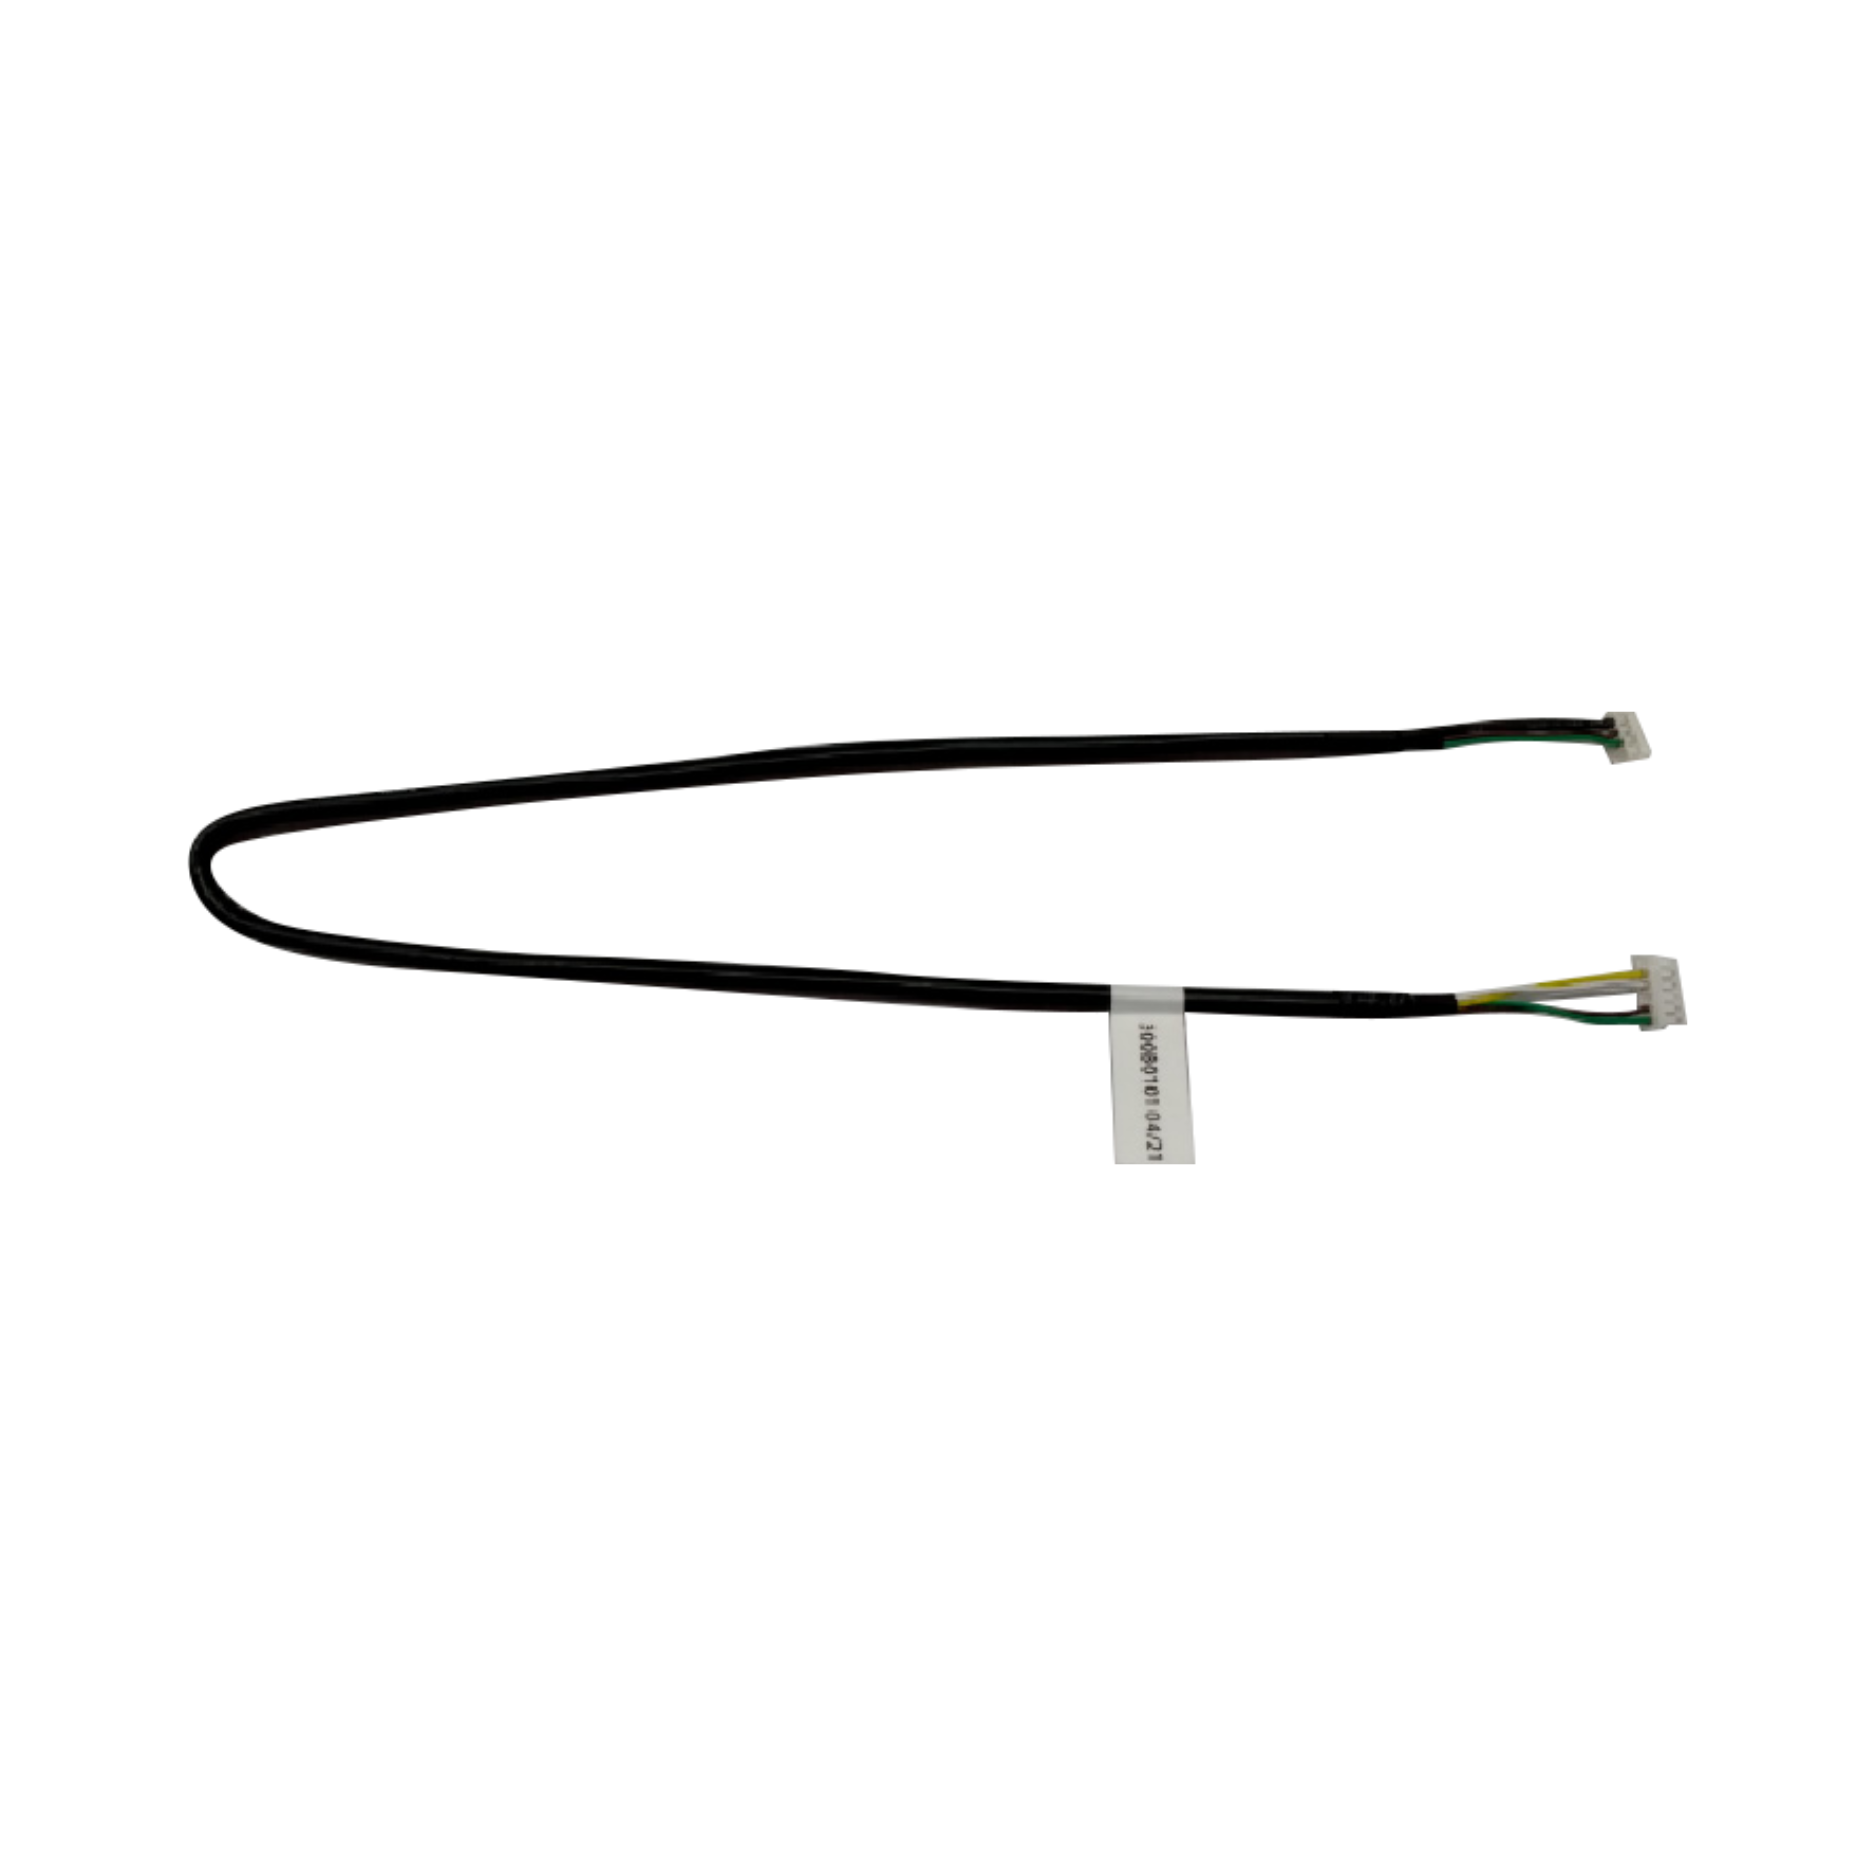 IR remote control cable